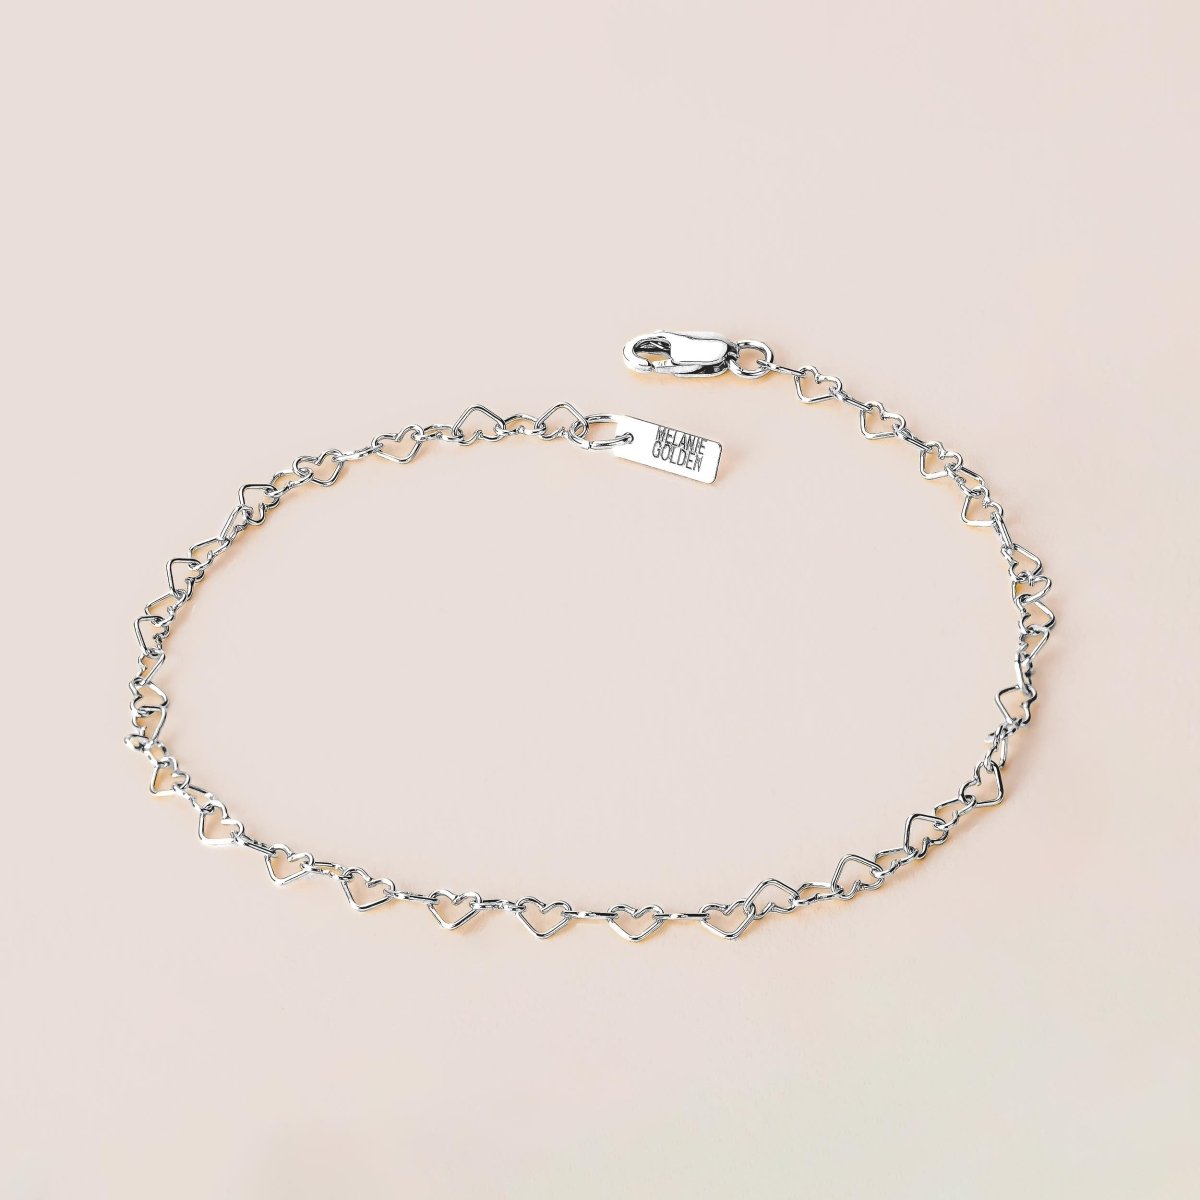 Heart Link Chain Anklet - Melanie Golden Jewelry - _badge_new, anklets, bridal, chain anklets, for the bride, love, motherhood, new, wedding